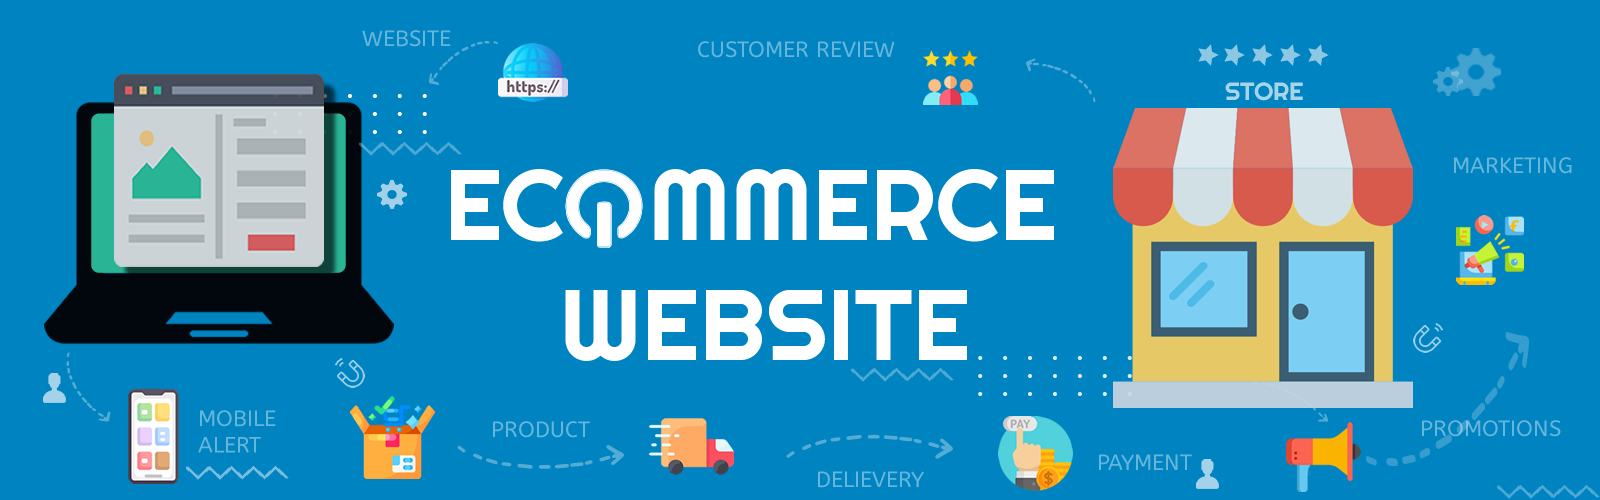 Digisoch ecommerce services